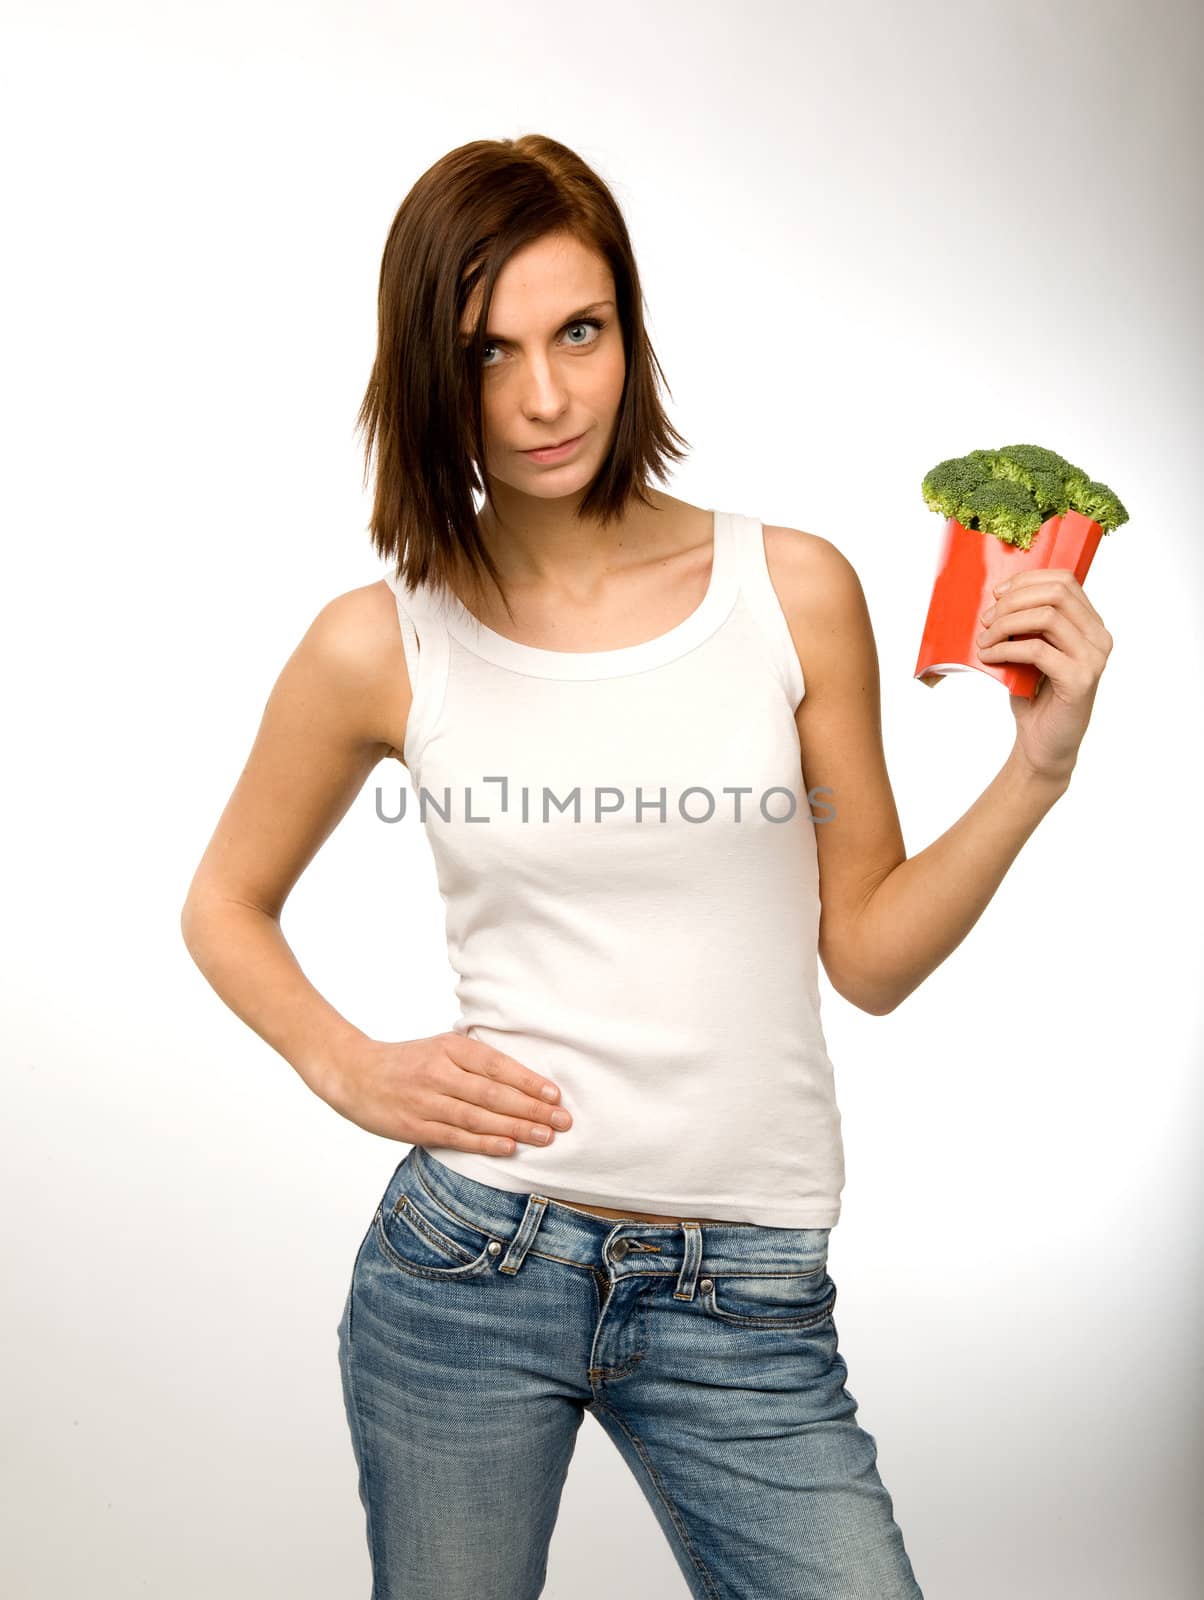 A woman holding a fast food container with a snack of vegetables